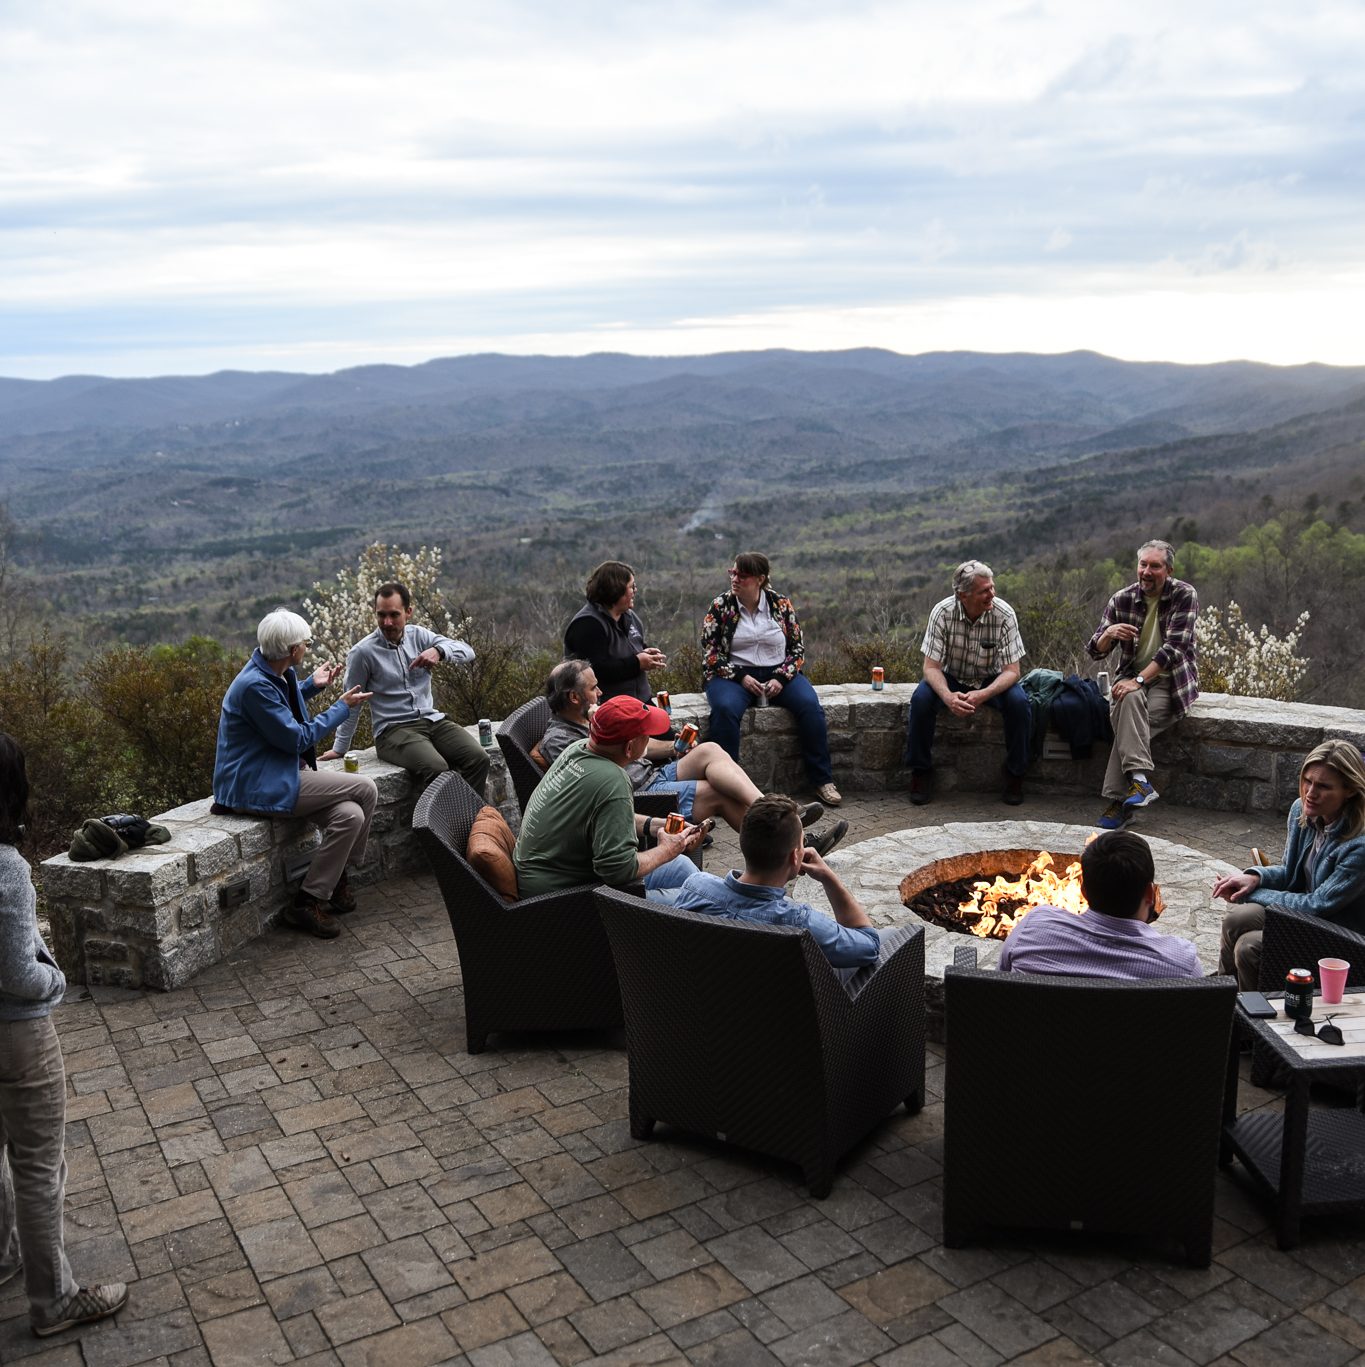 About 15 people sit around a fire, some in chairs and others on a stone wall. Behind them, the sun sets on the mountains